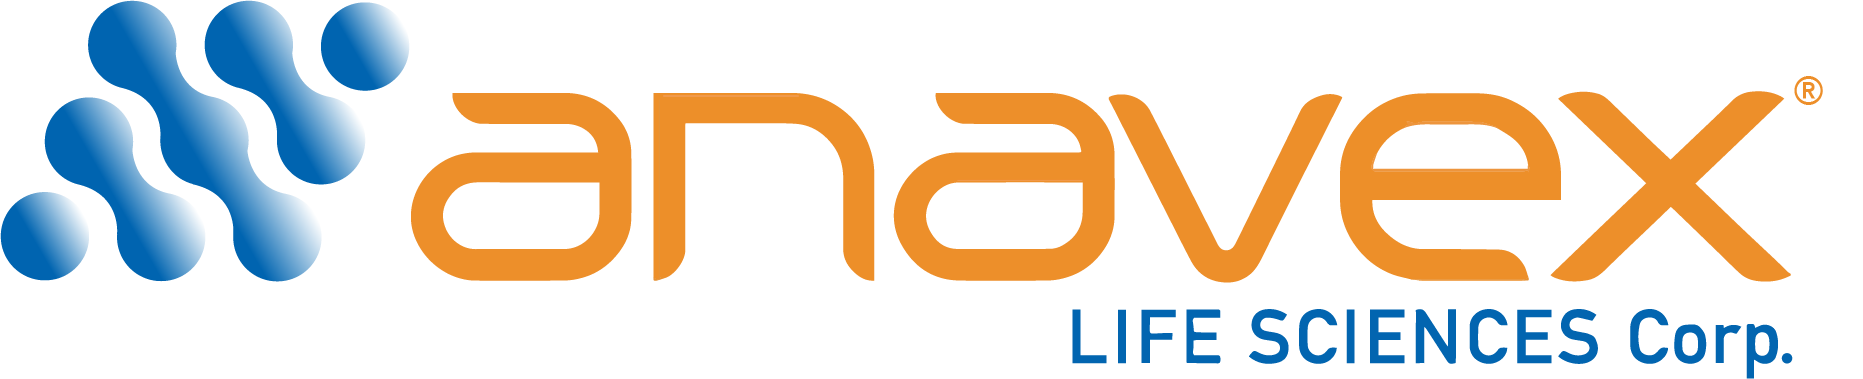 Anavex Life Sciences Announces Grant of U.S. Patent Covering Blarcamesine (ANAVEX®2-73) for Treatment of Insomnia or Anxiety